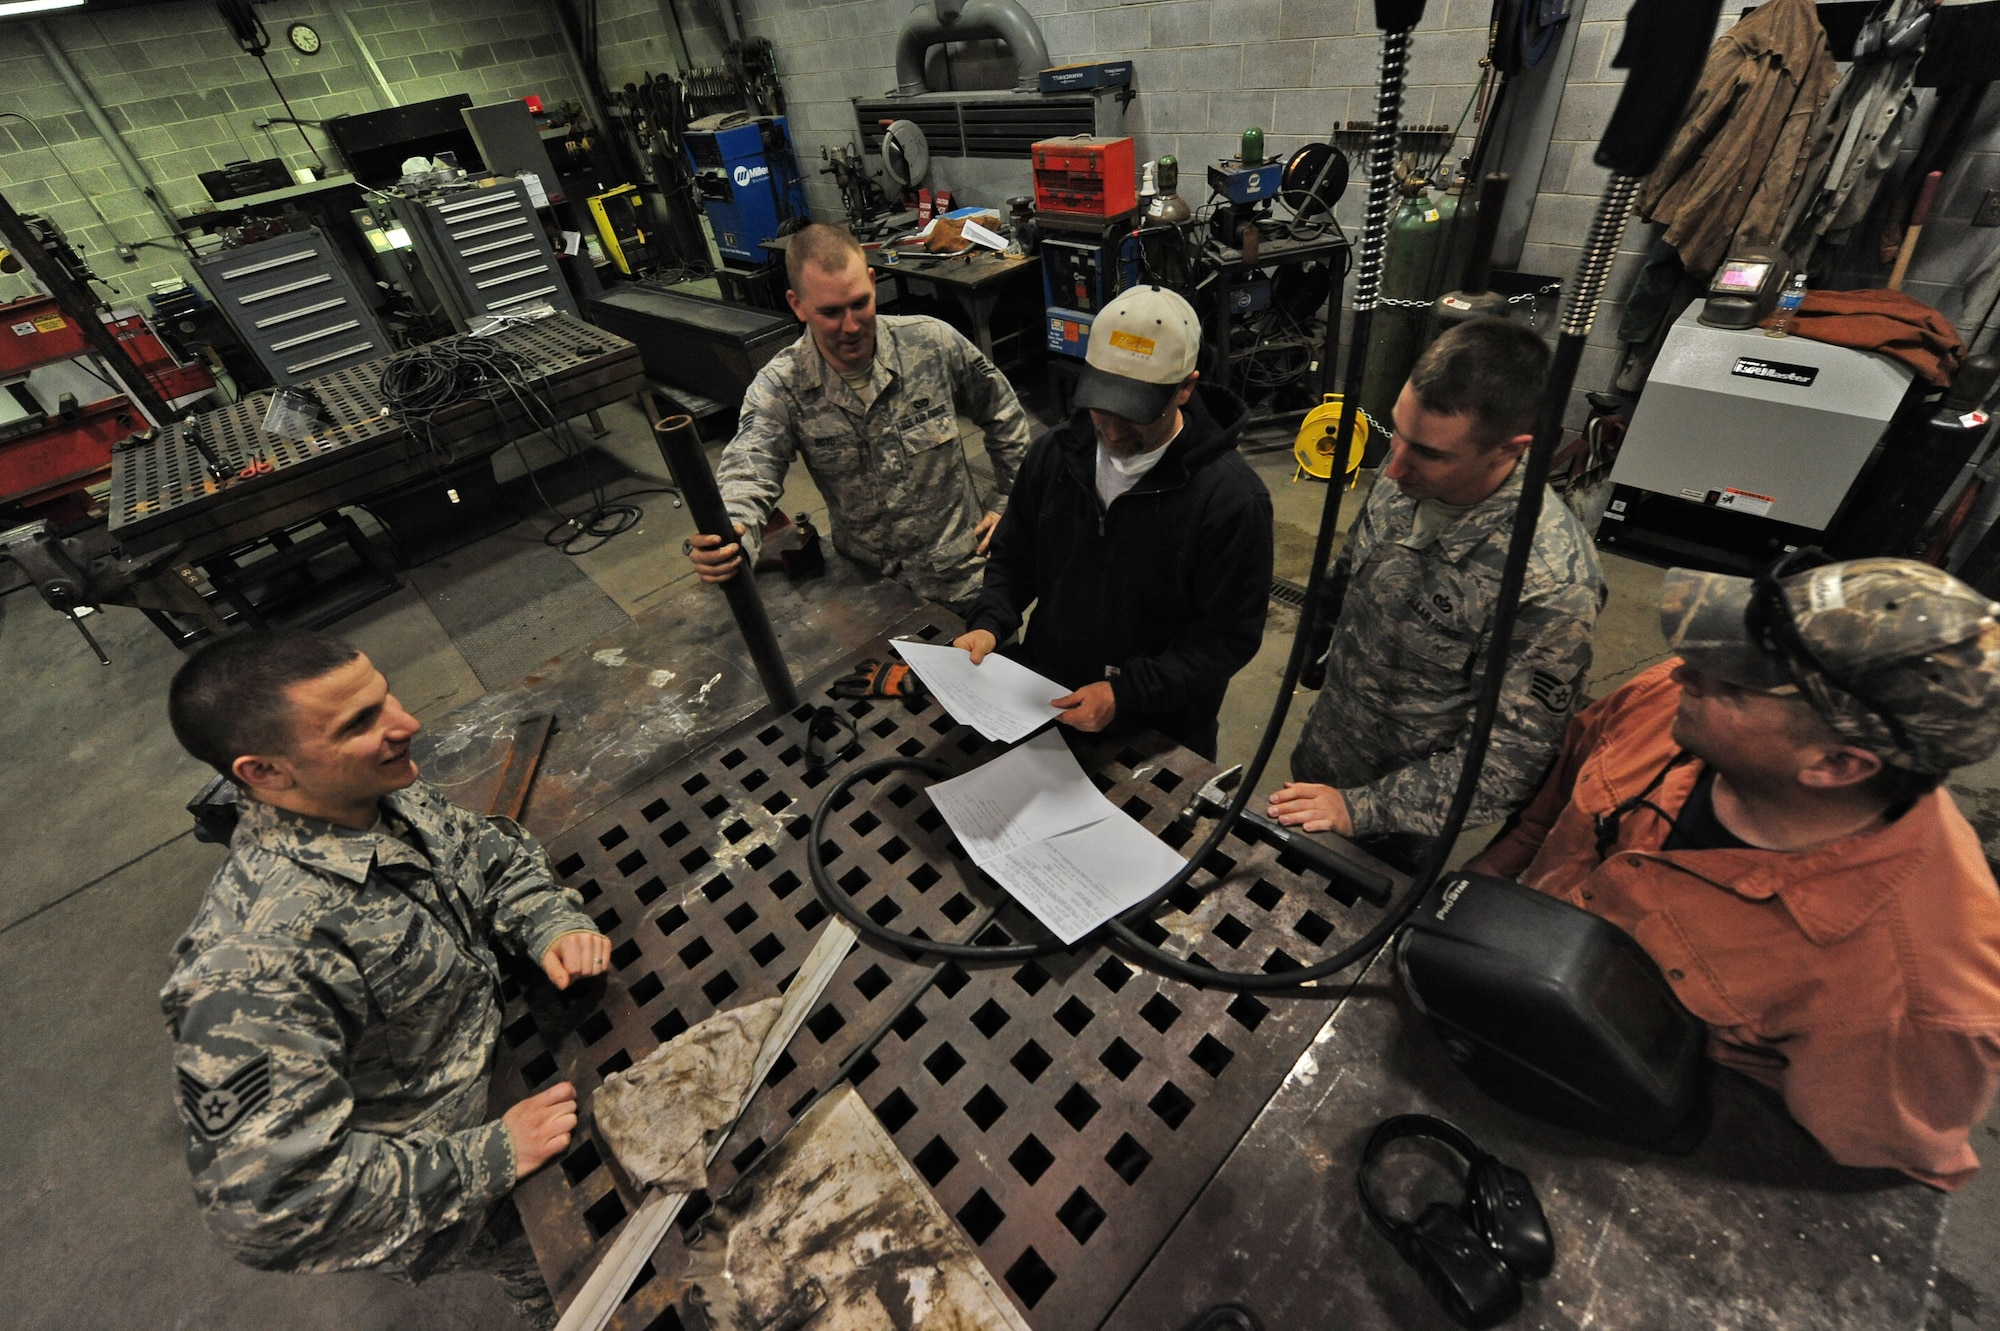 WHITEMAN AIR FORCE BASE, Mo. -- Members from the 509th Civil Engineer Squadron structures flight discuss procedures for snow plow repair, Feb. 27. The flight constructs, remodels, repairs and maintains 861 base facilities totaling over 4.8 million square feet. (U.S. Air Force photo/Staff Sgt. Nick Wilson) (Released)